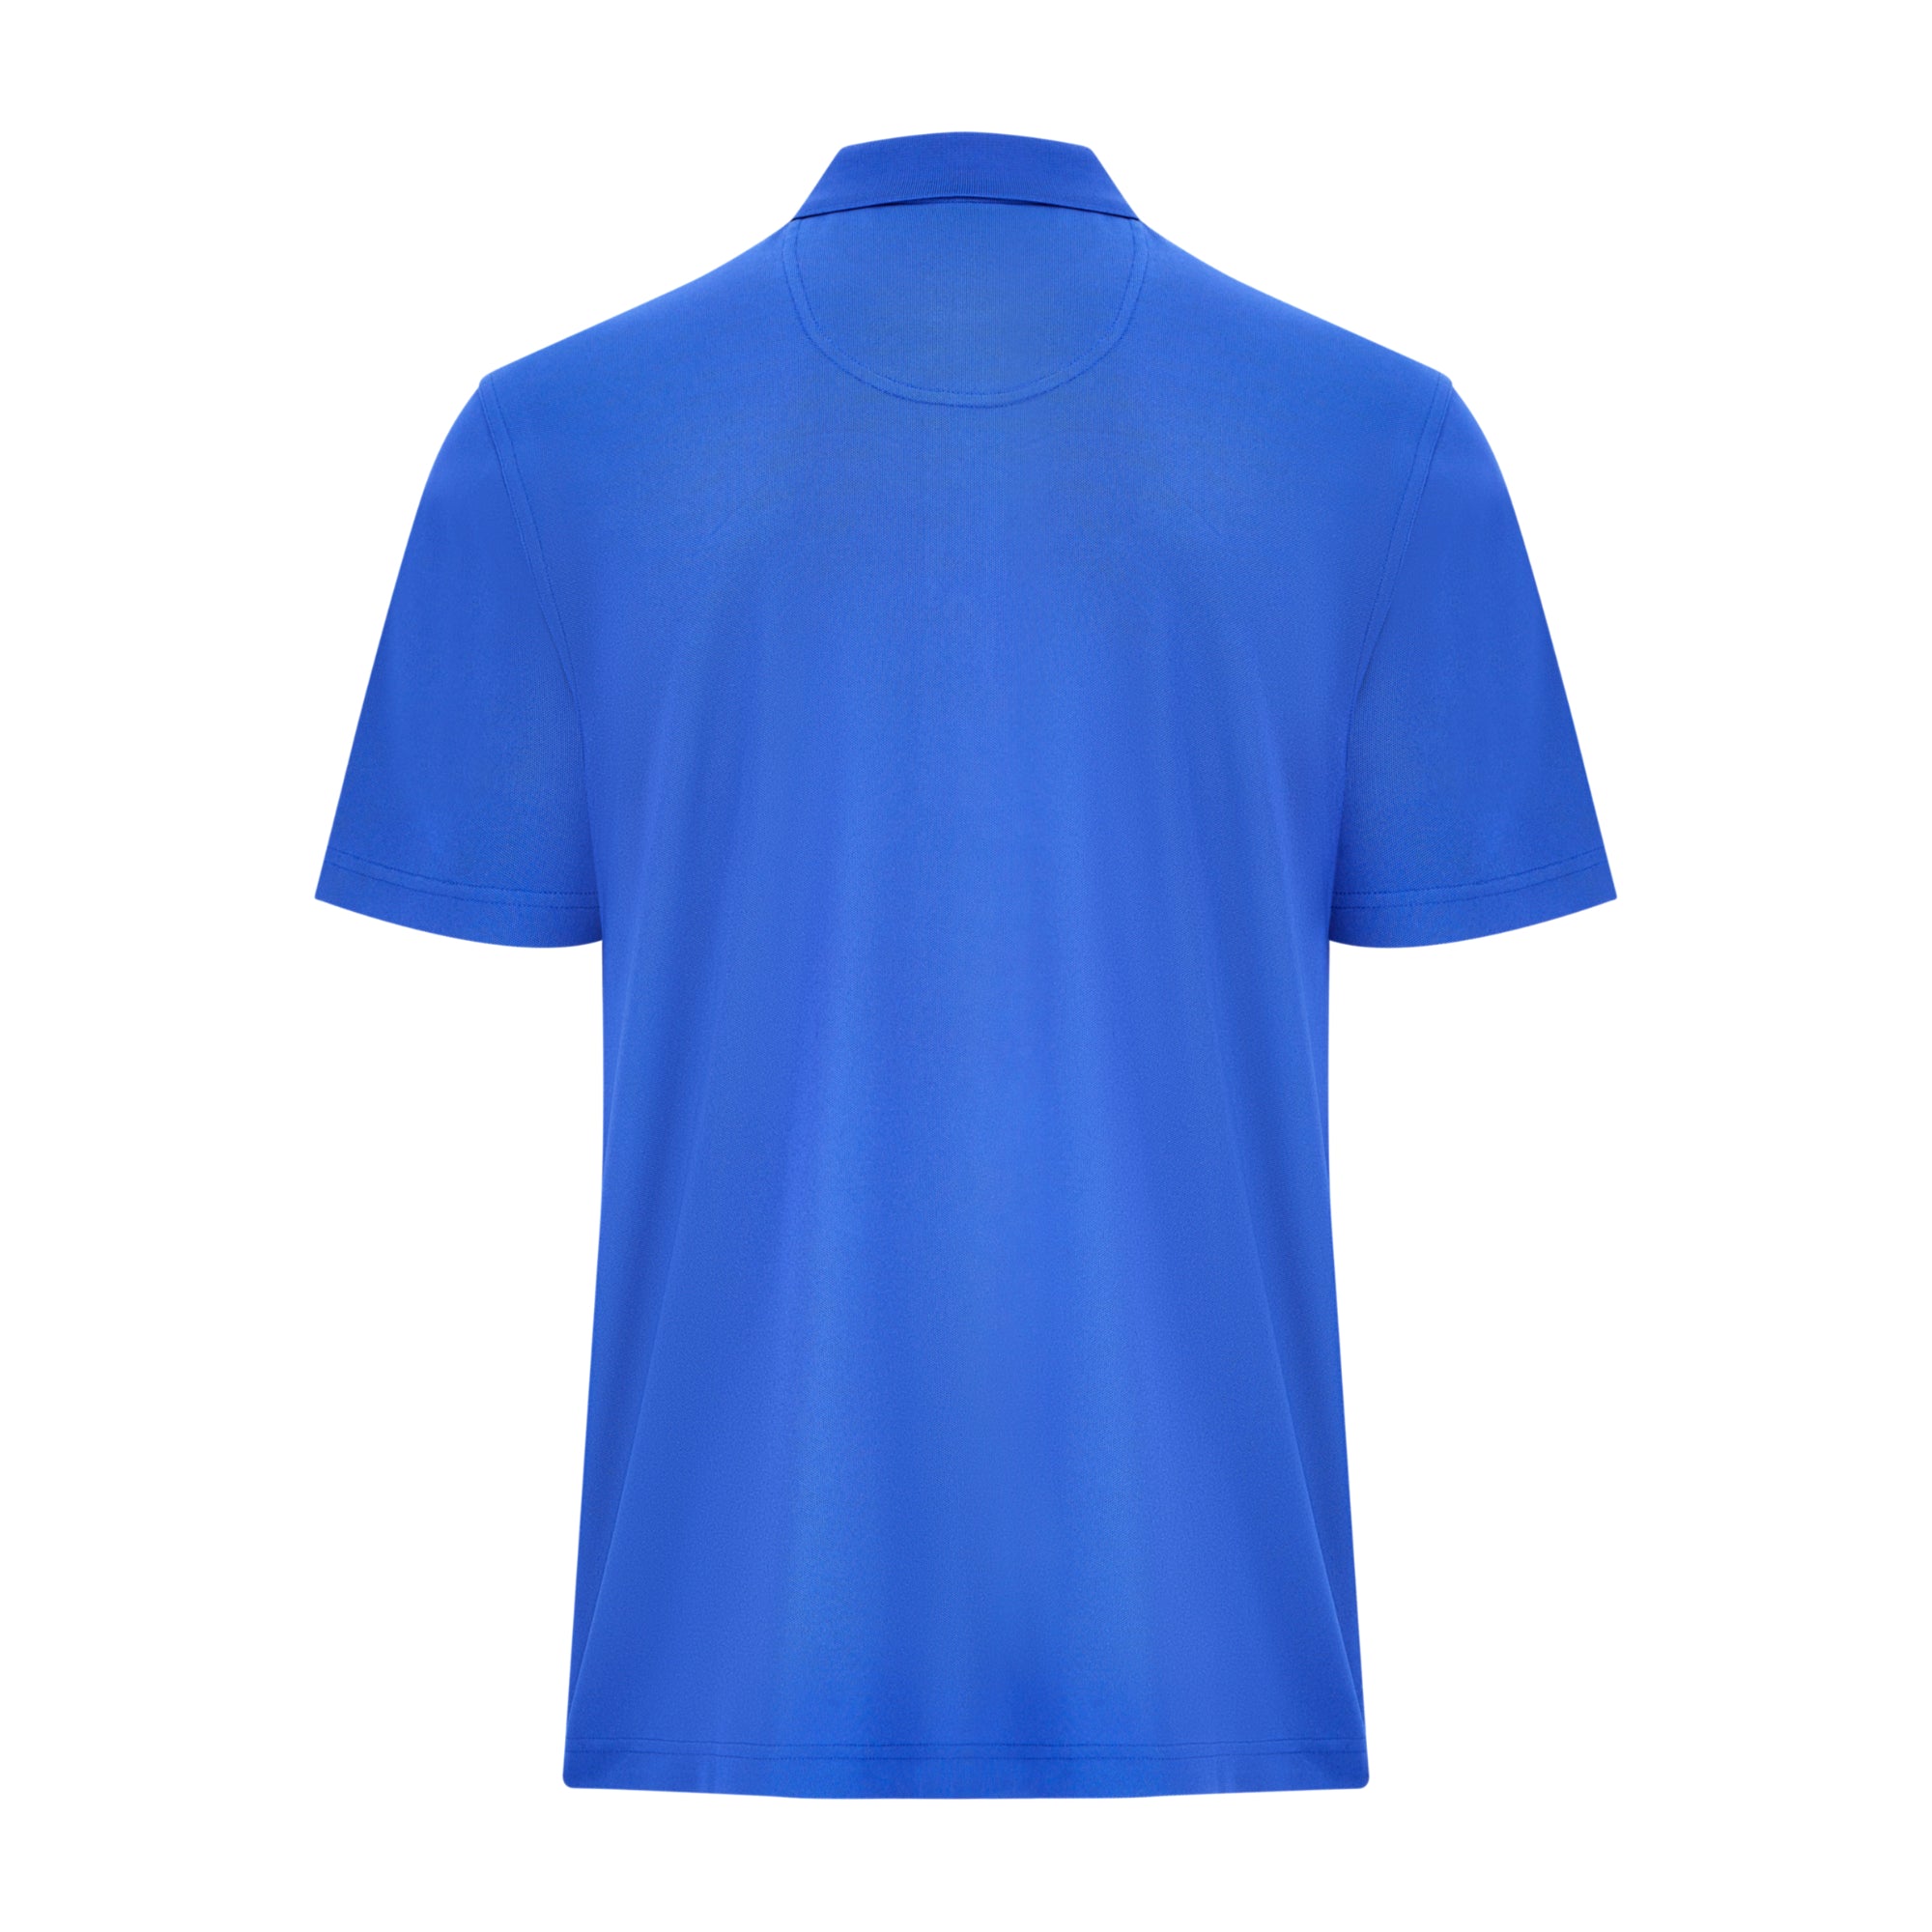 2023 Ryder Cup Rome Collection Men's Royal Blue Polo Shirt Front